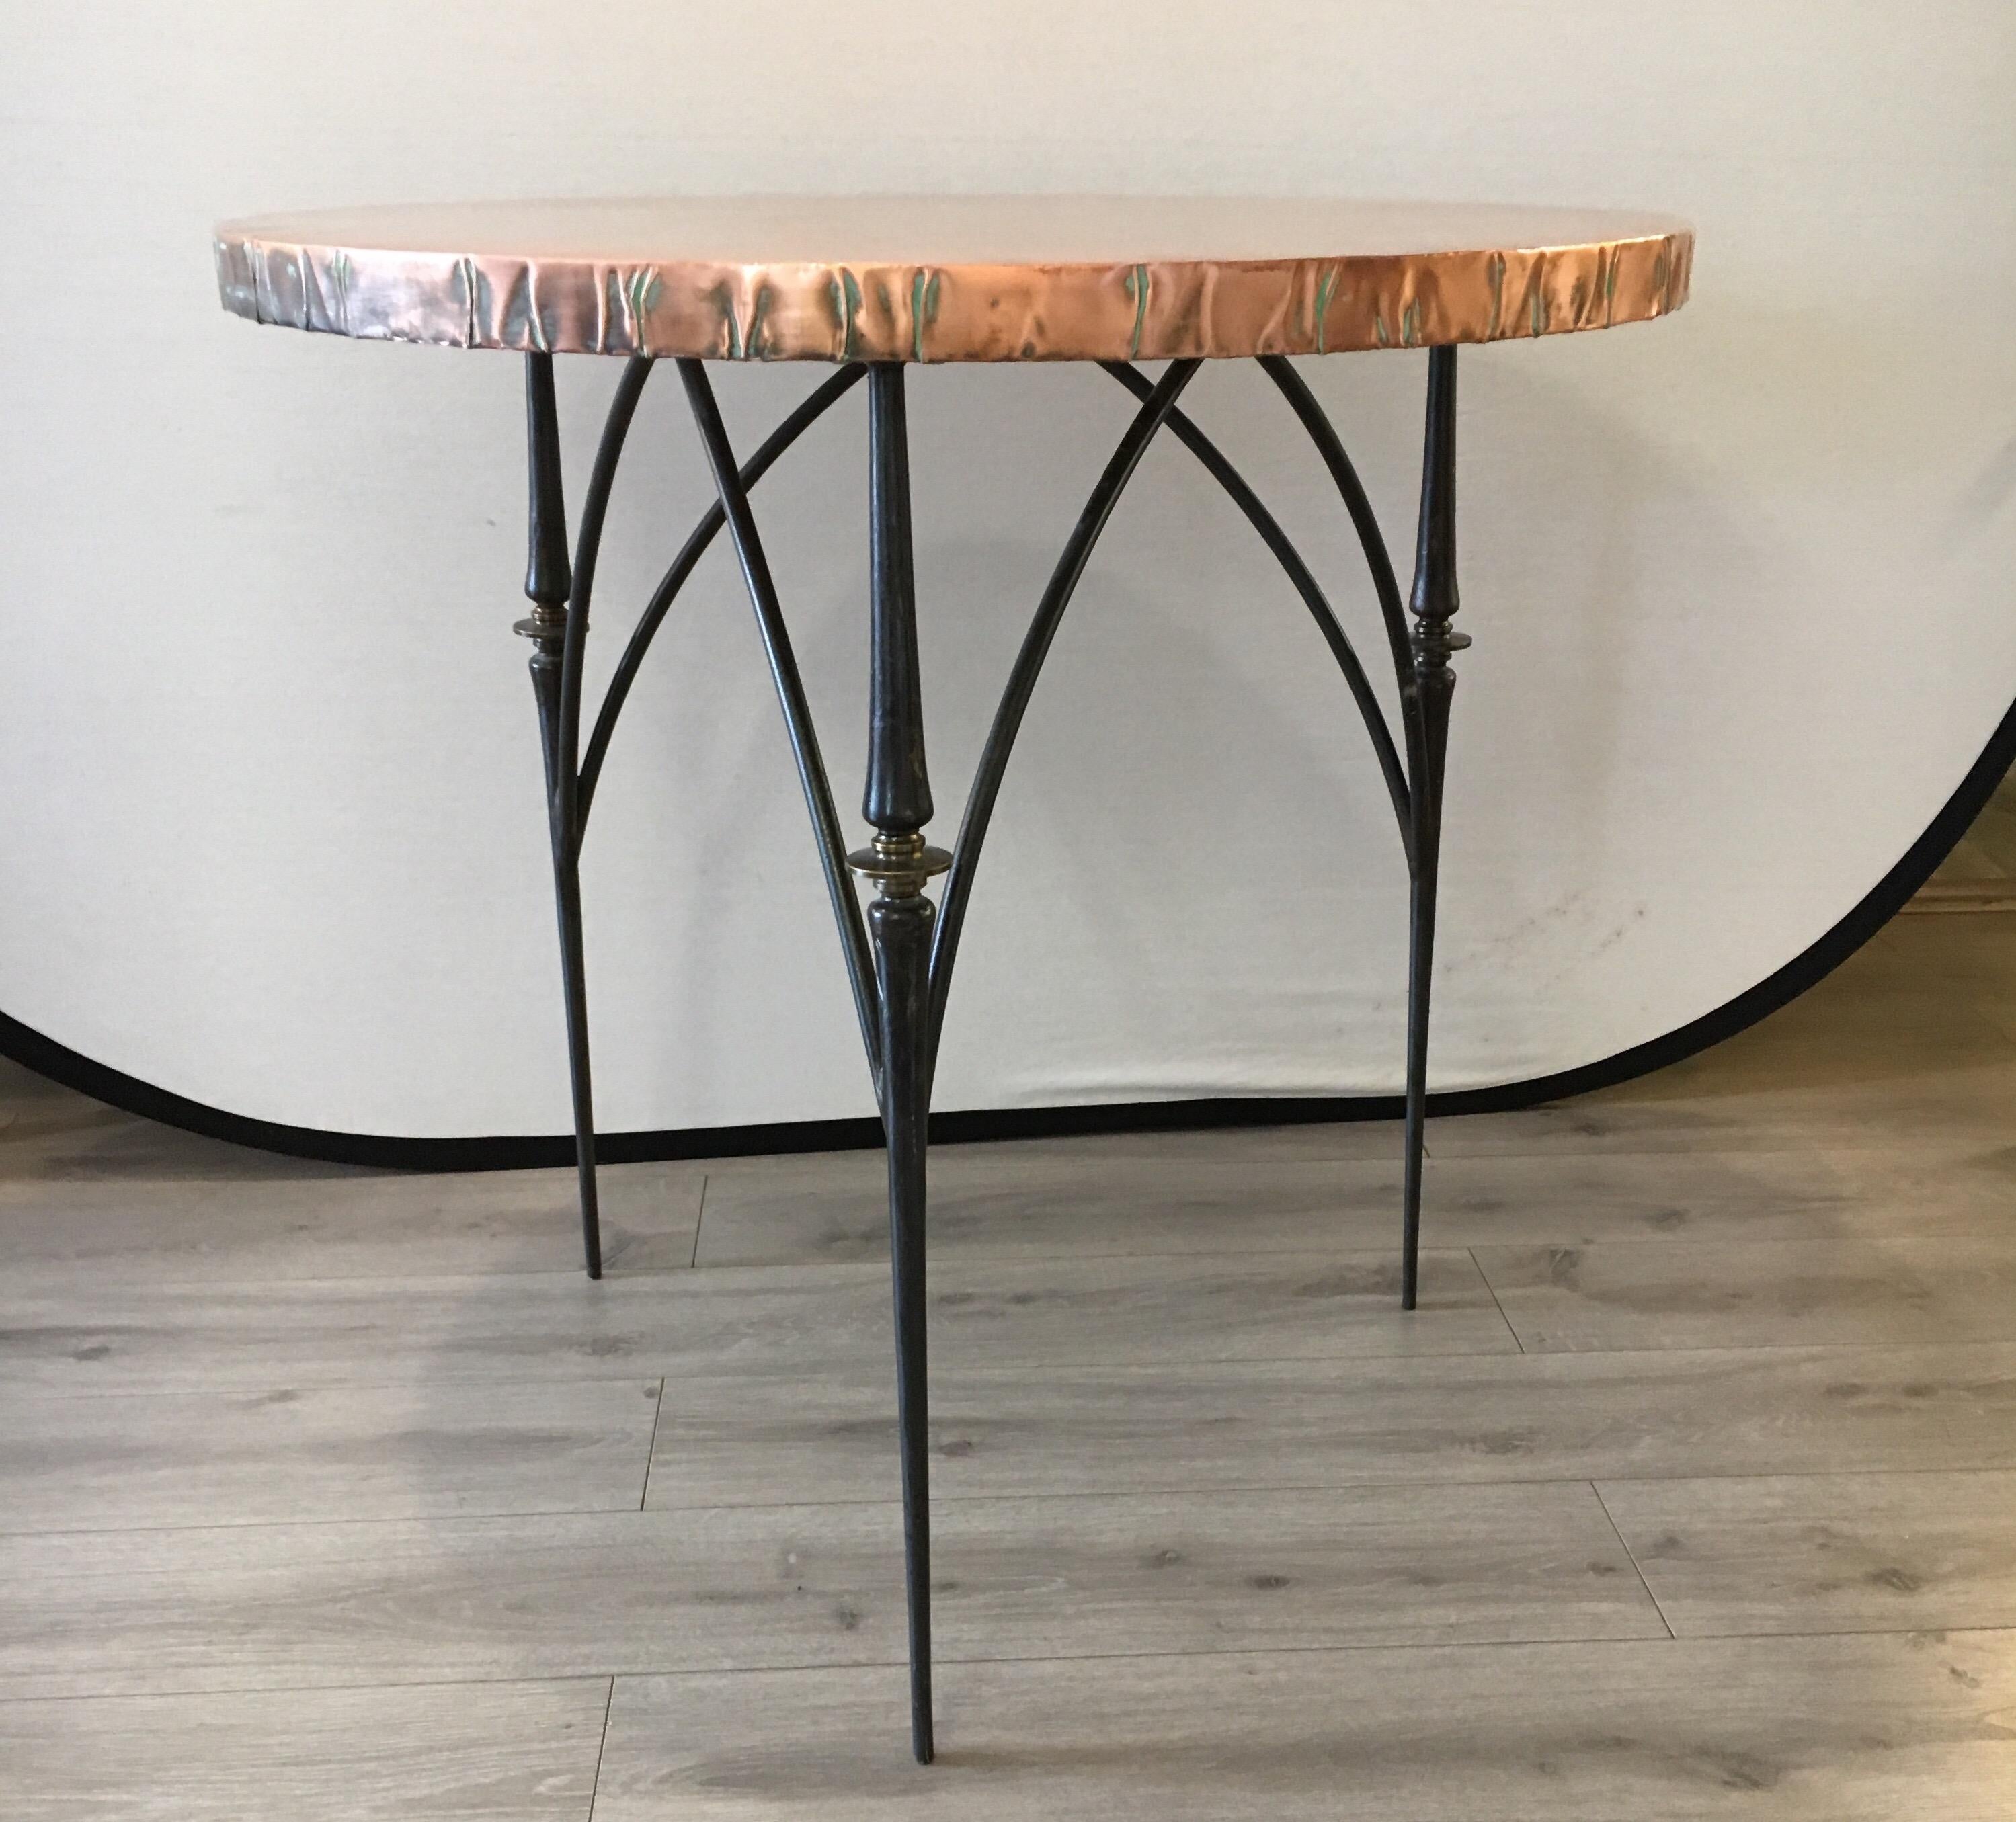 Late 20th Century Brutalist Sculptural Hammered Copper Center Foyer Dining Table